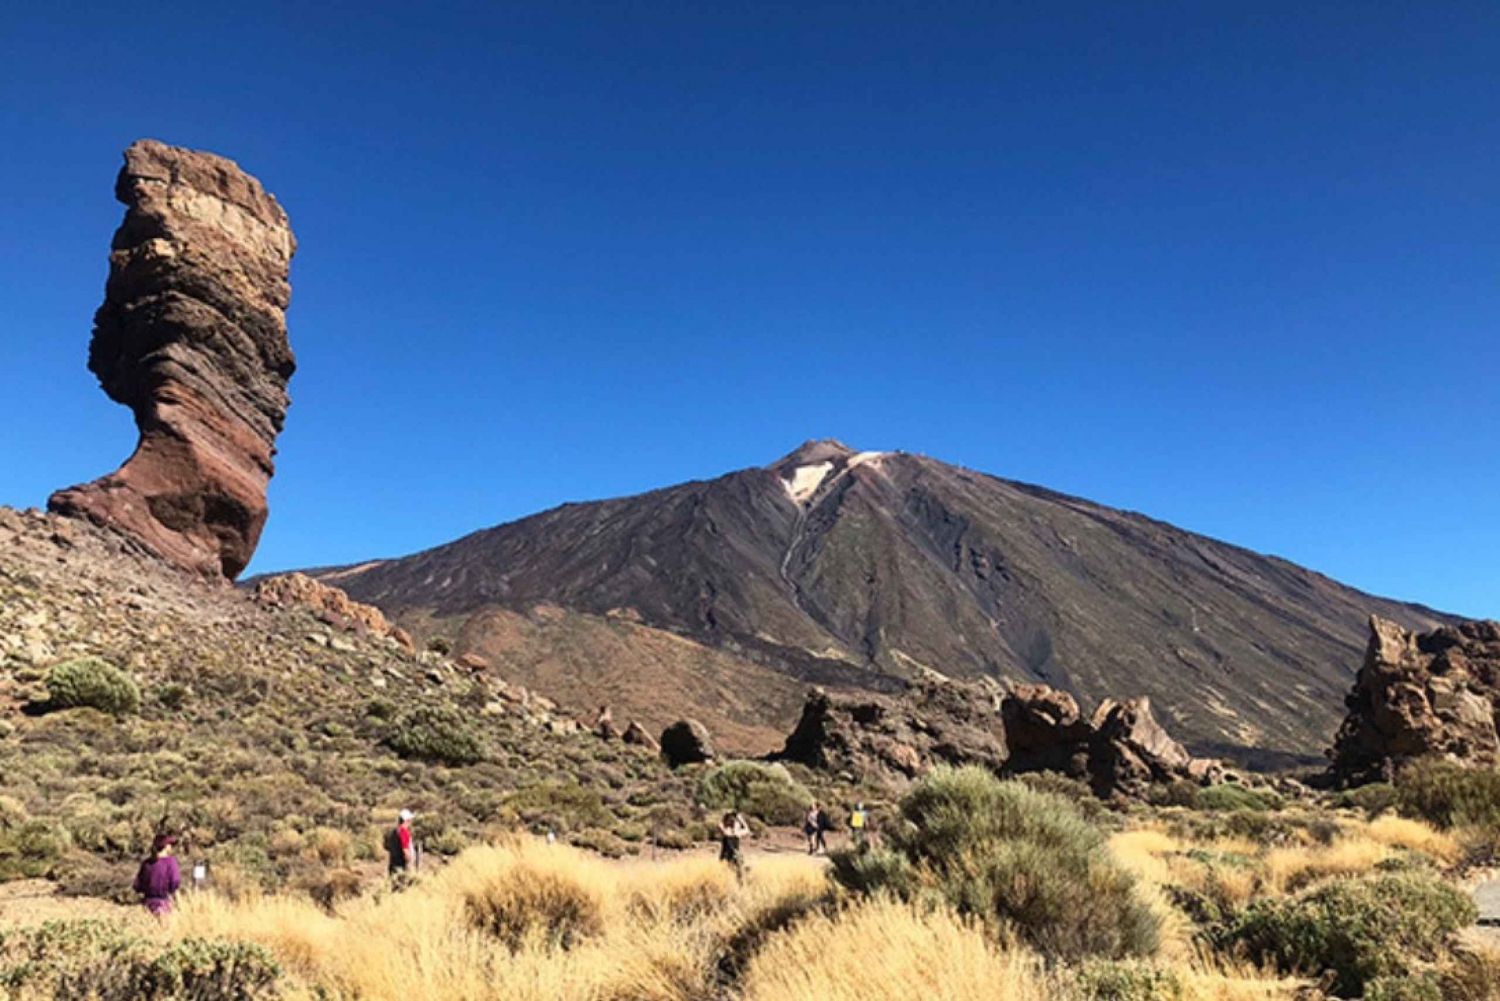 Tenerife: Full-day guided tour around Teide National Park